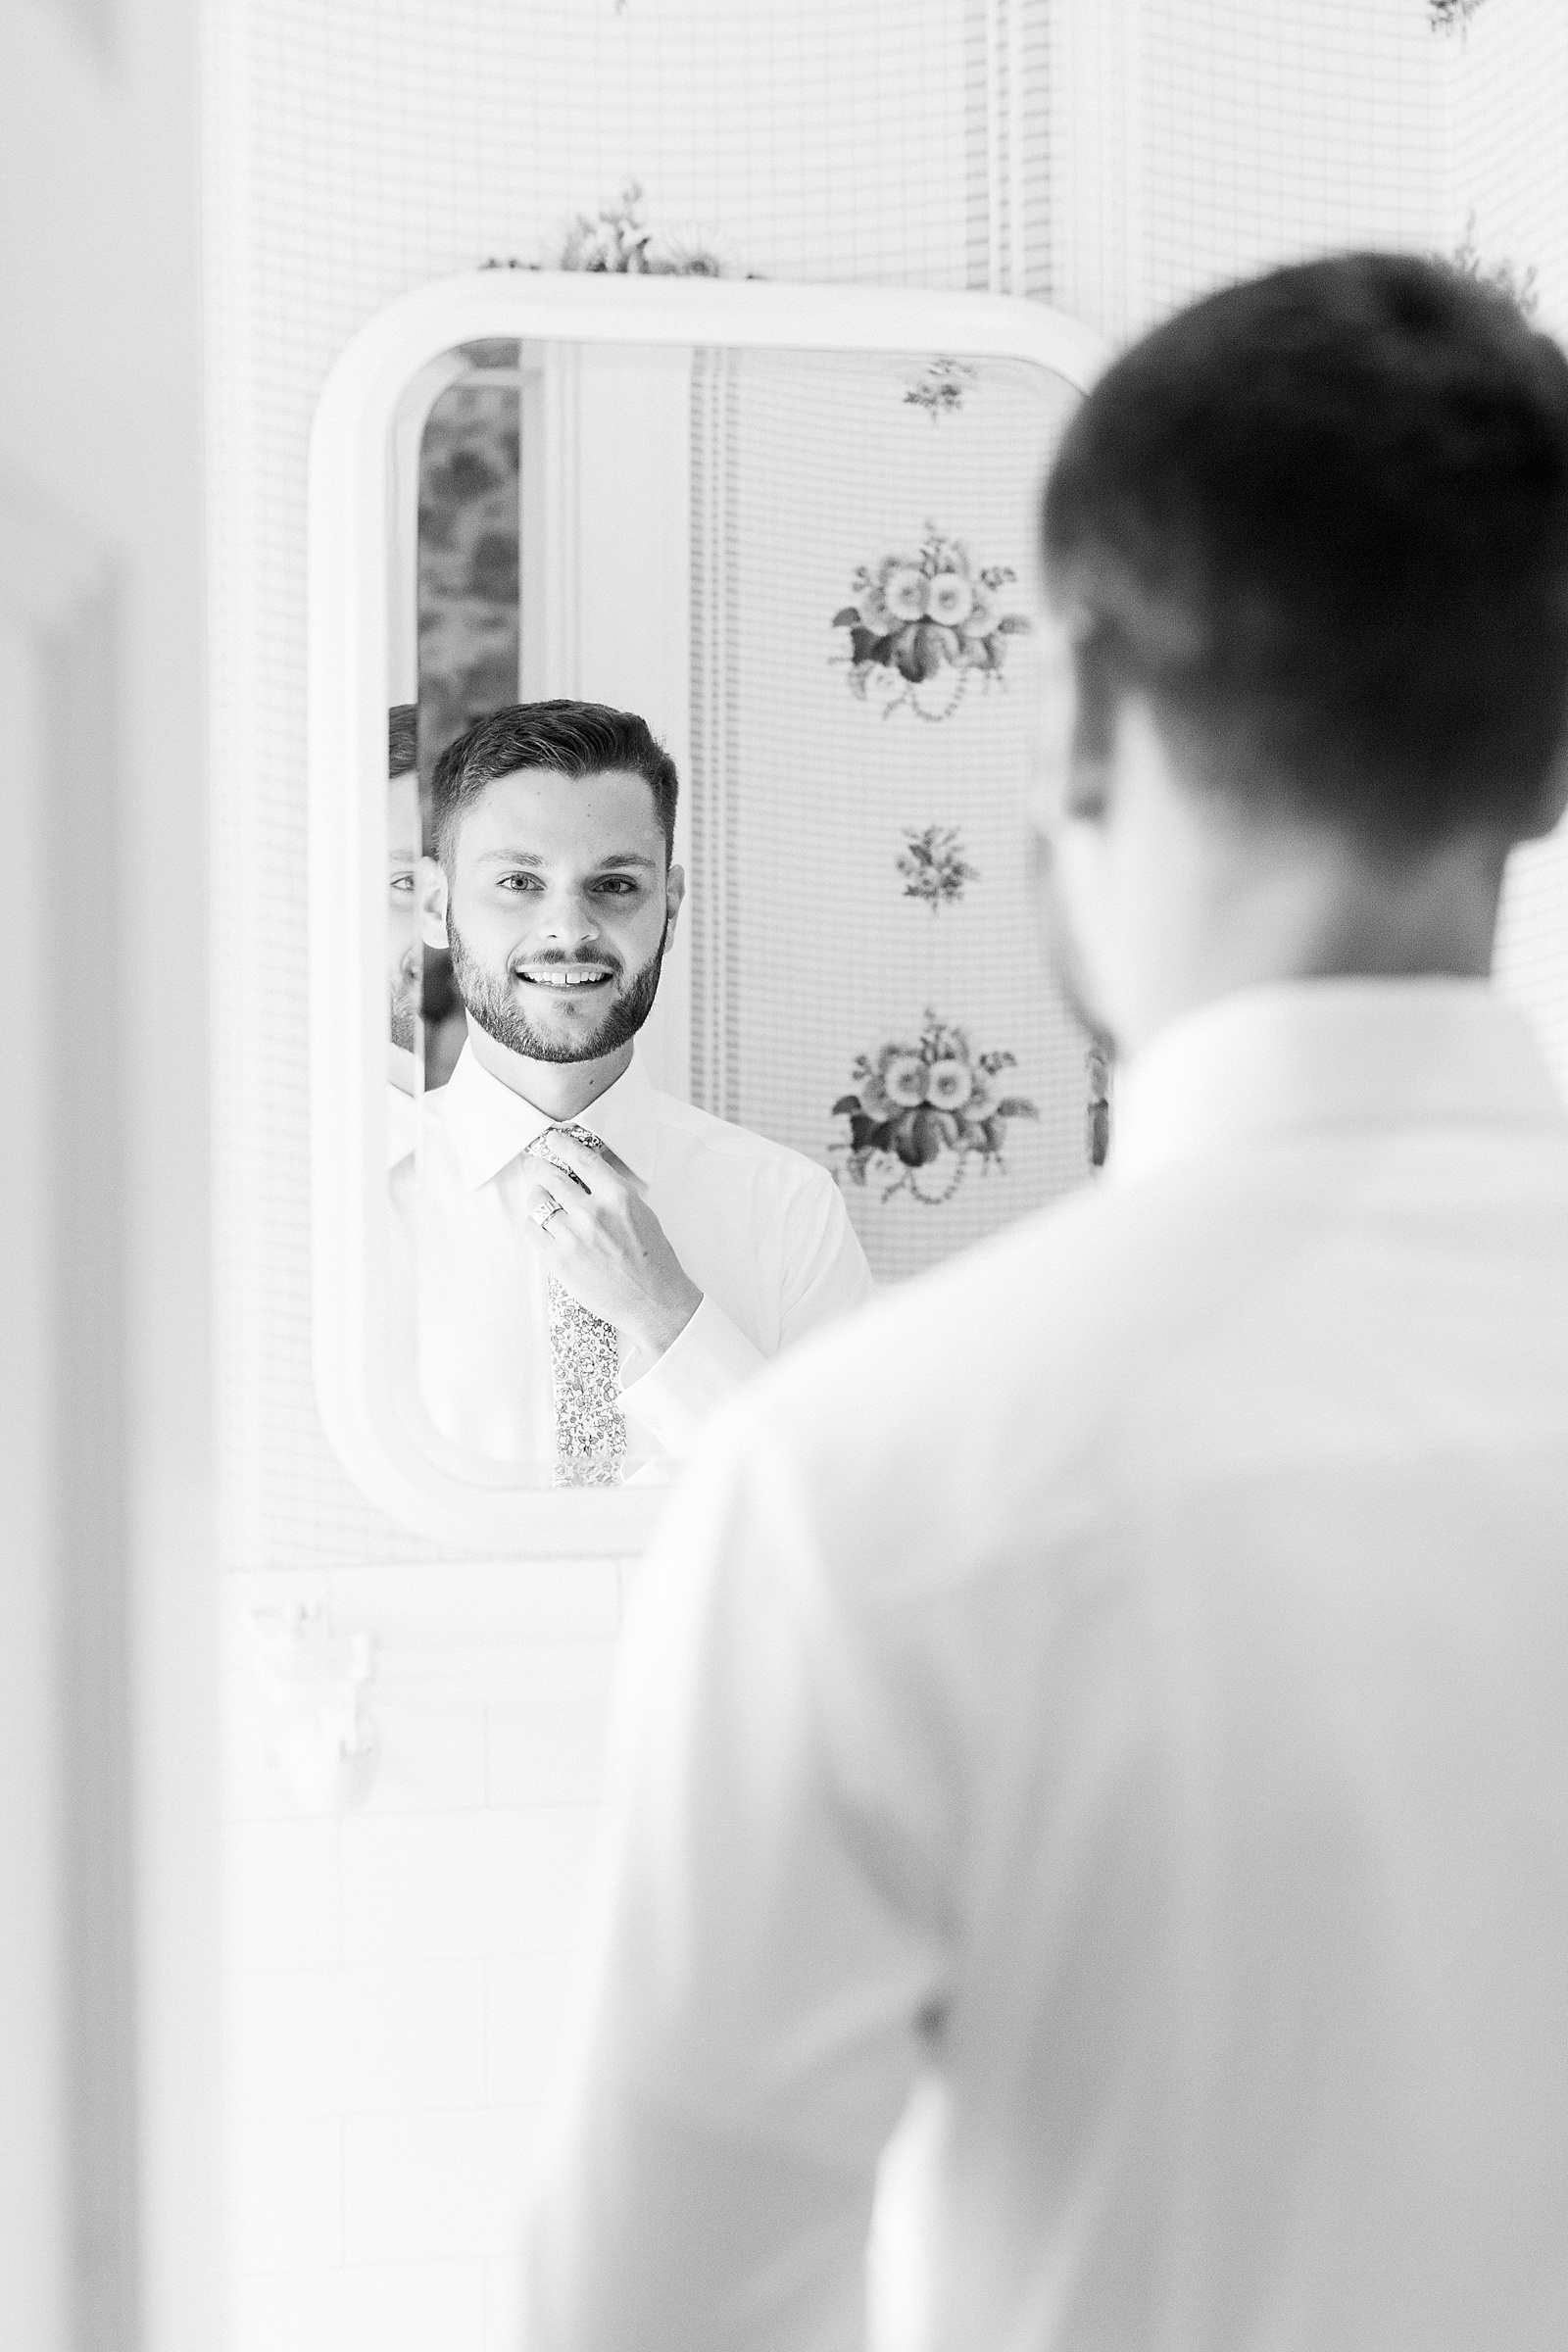 Black and white image of groom looking into a mirror and adjusting his tie.